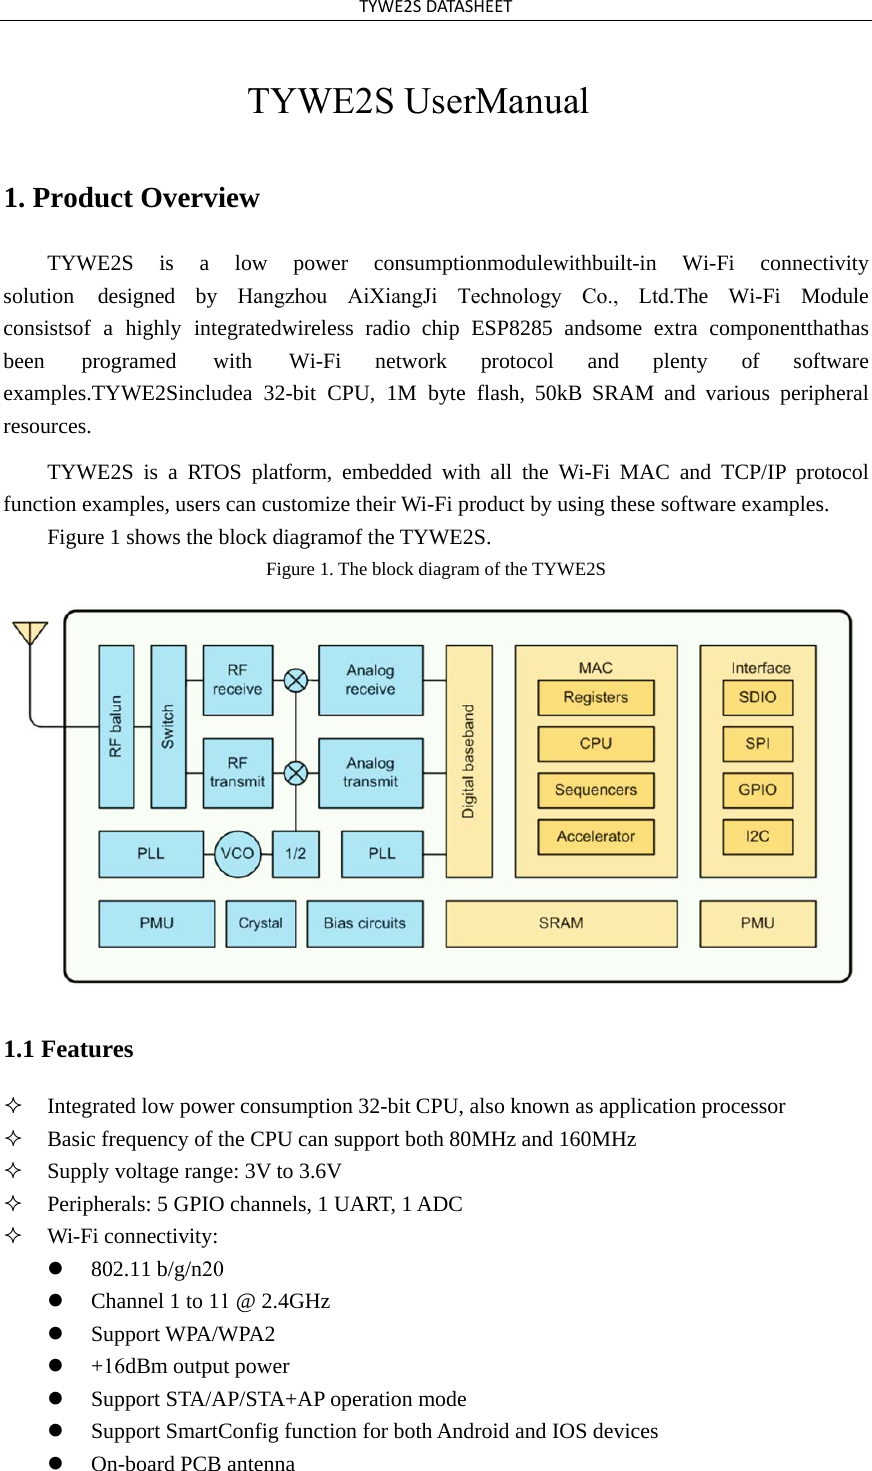 TYWE2SDATASHEETTYWE2S UserManual1. Product OverviewTYWE2S  is  a  low  power  consumptionmodulewithbuilt-in  Wi-Fi  connectivity solution  designed  by  Hangzhou  AiXiangJi  Technology  Co.,  Ltd.The Wi-Fi  Module consistsof a highly integratedwireless radio chip ESP8285 andsome extra componentthathas been programed  with  Wi-Fi  network  protocol  and  plenty  of  software examples.TYWE2Sincludea  32-bit  CPU,  1M  byte  flash,  50kB  SRAM  and  various  peripheral resources. TYWE2S is a RTOS platform, embedded with all the Wi-Fi MAC and TCP/IP protocol function examples, users can customize their Wi-Fi product by using these software examples. Figure 1 shows the block diagramof the TYWE2S. Figure 1. The block diagram of the TYWE2S 1.1 Features Integrated low power consumption 32-bit CPU, also known as application processorBasic frequency of the CPU can support both 80MHz and 160MHzSupply voltage range: 3V to 3.6VPeripherals: 5 GPIO channels, 1 UART, 1 ADCWi-Fi connectivity:802.11 b/g/n20Channel 1 to 11 @ 2.4GHzSupport WPA/WPA2+16dBm output powerSupport STA/AP/STA+AP operation modeSupport SmartConfig function for both Android and IOS devicesOn-board PCB antenna